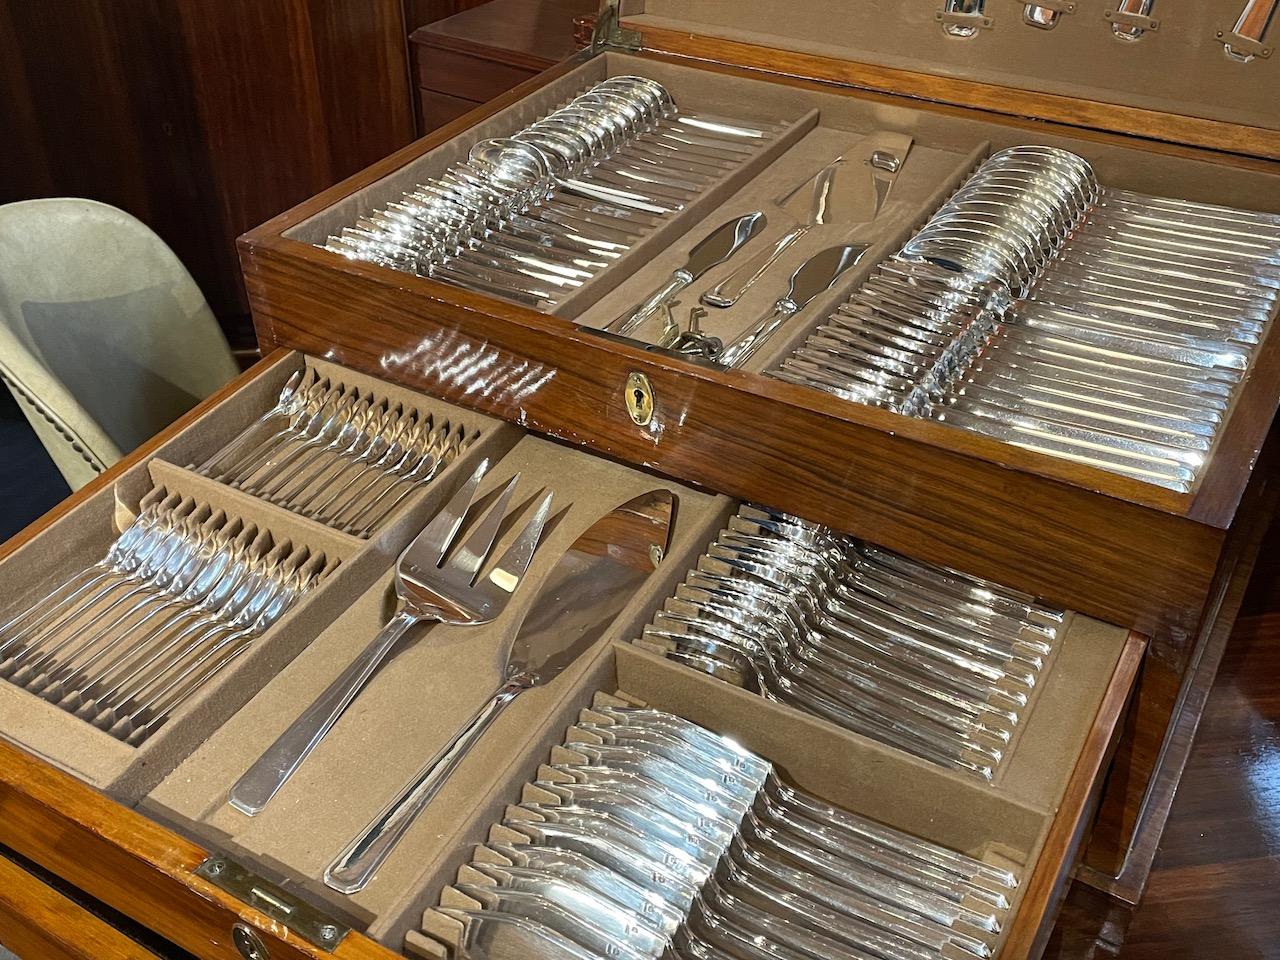 Flawless and complete silver service for 12 with ten pieces in each place setting and twelve unique serving pieces by the French company Ravinet d’Enfert. Nestled in a beautiful wooden silverware chest with a fitted felt lining that holds each piece